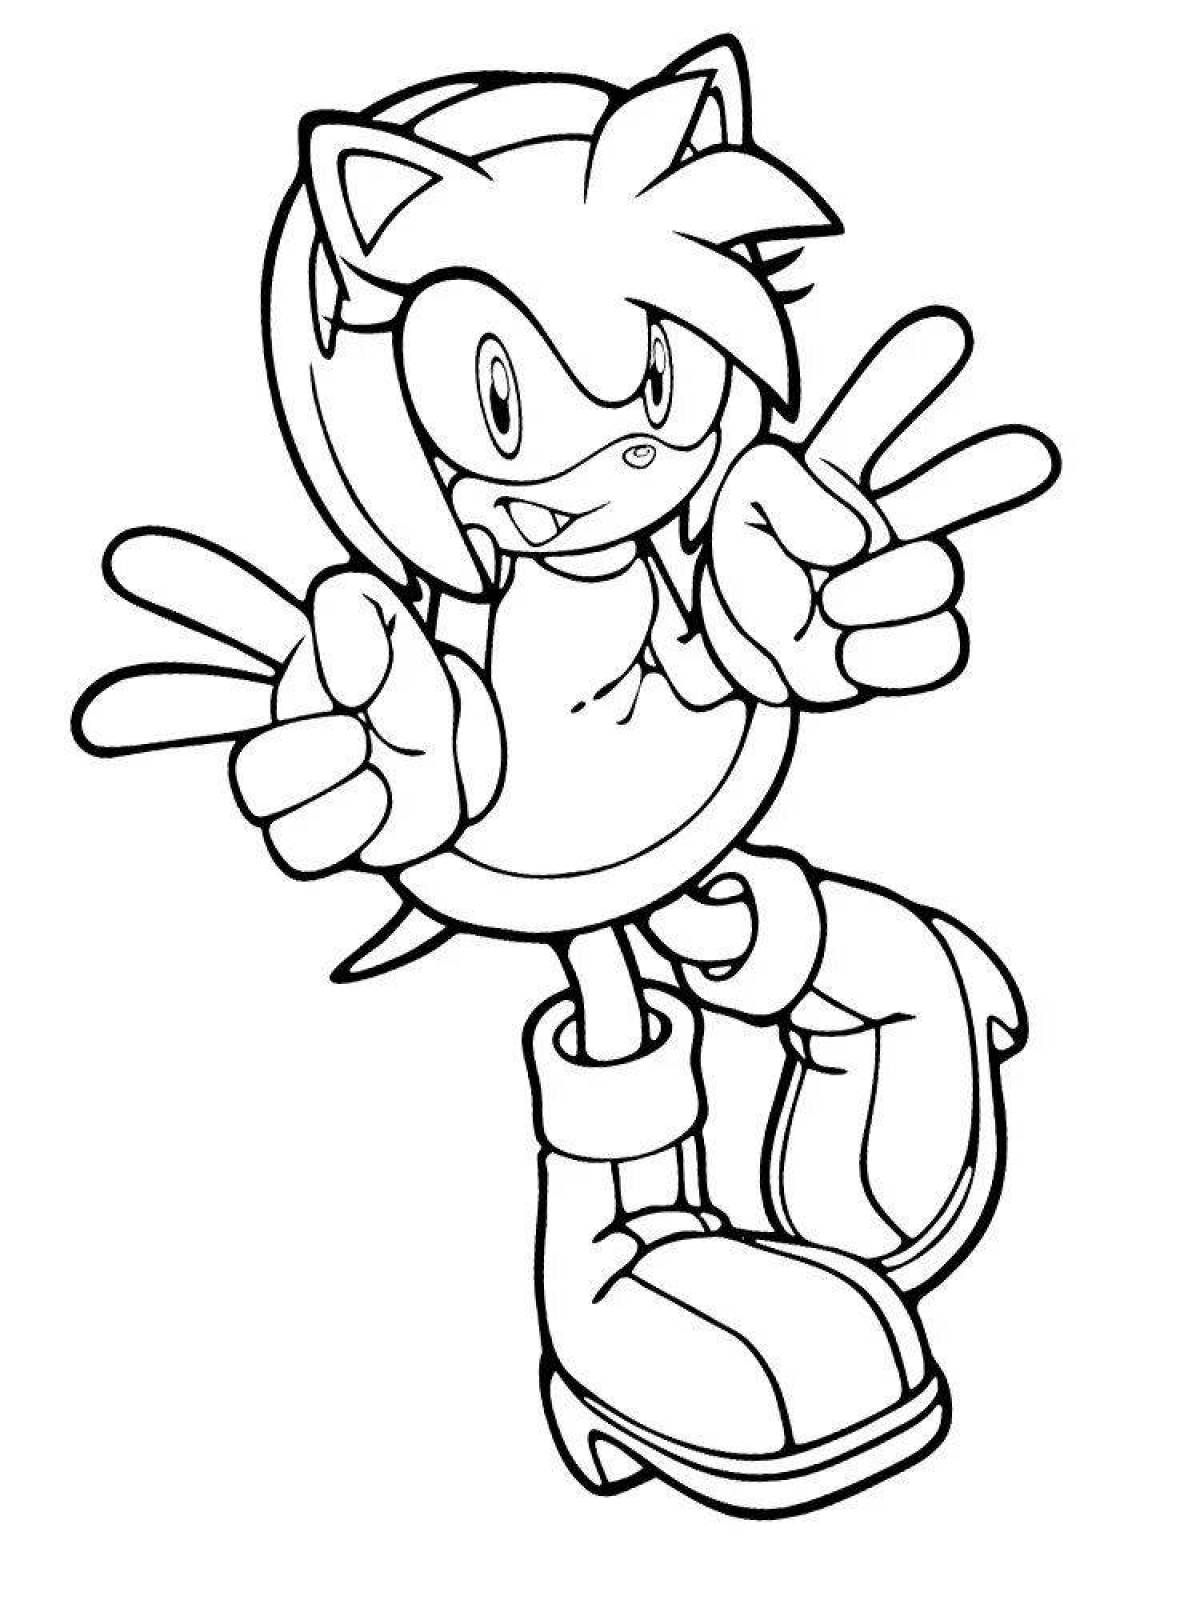 Peaceful blue sonic coloring page